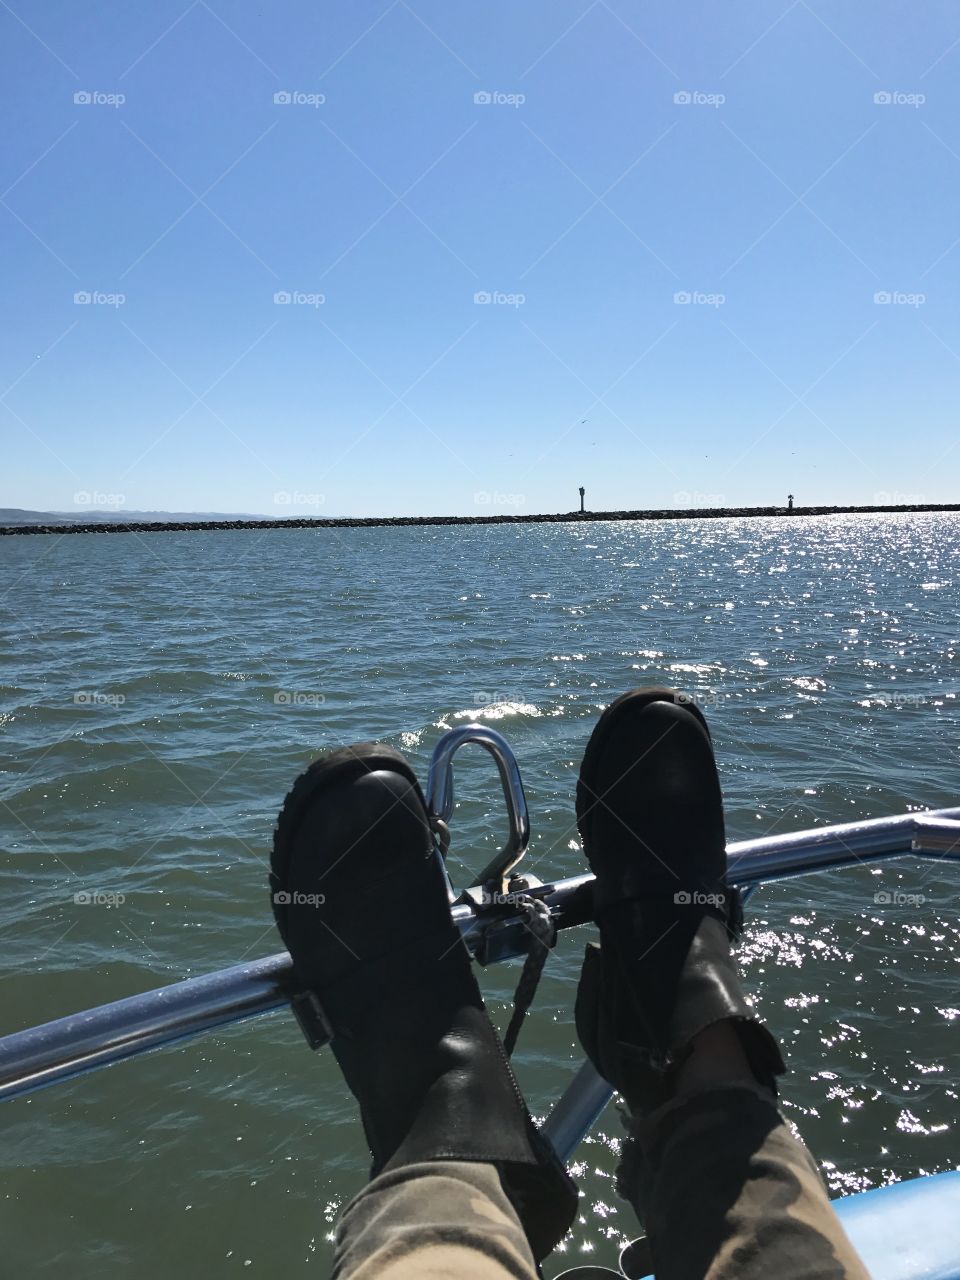 Relaxing on a boat